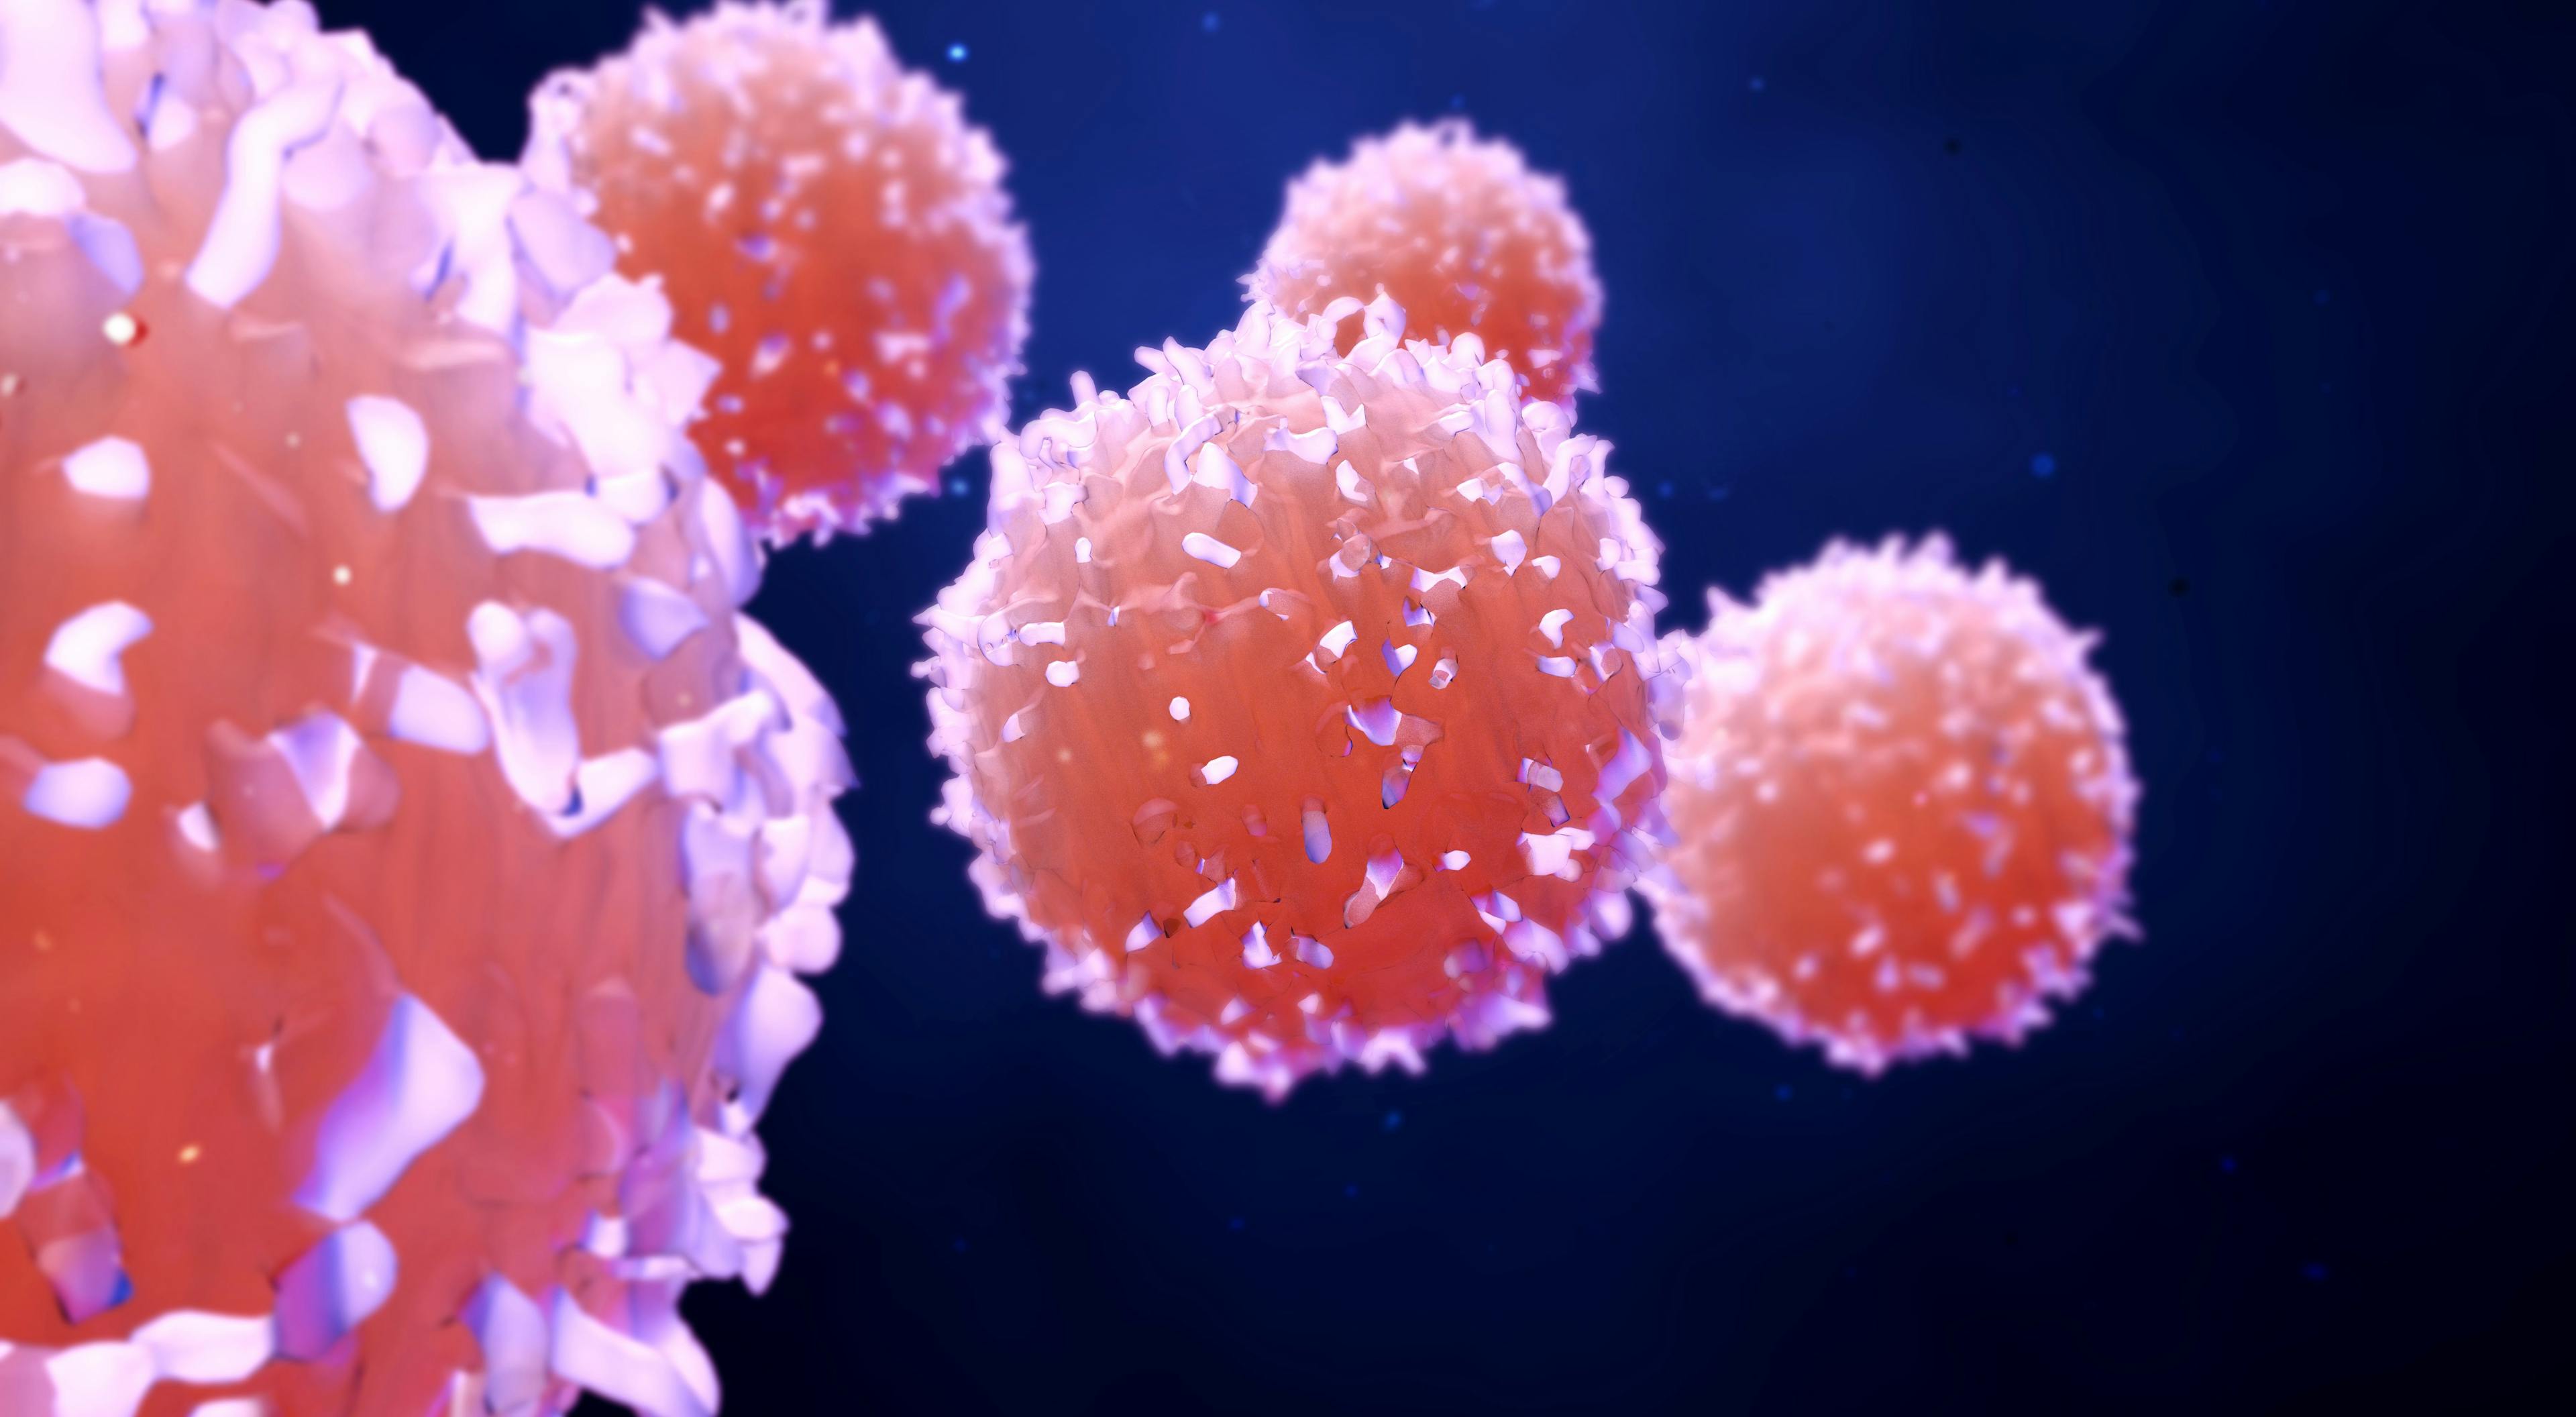 Subset of Cells in Bladder Cancer May Hinder Immunotherapy Outcomes